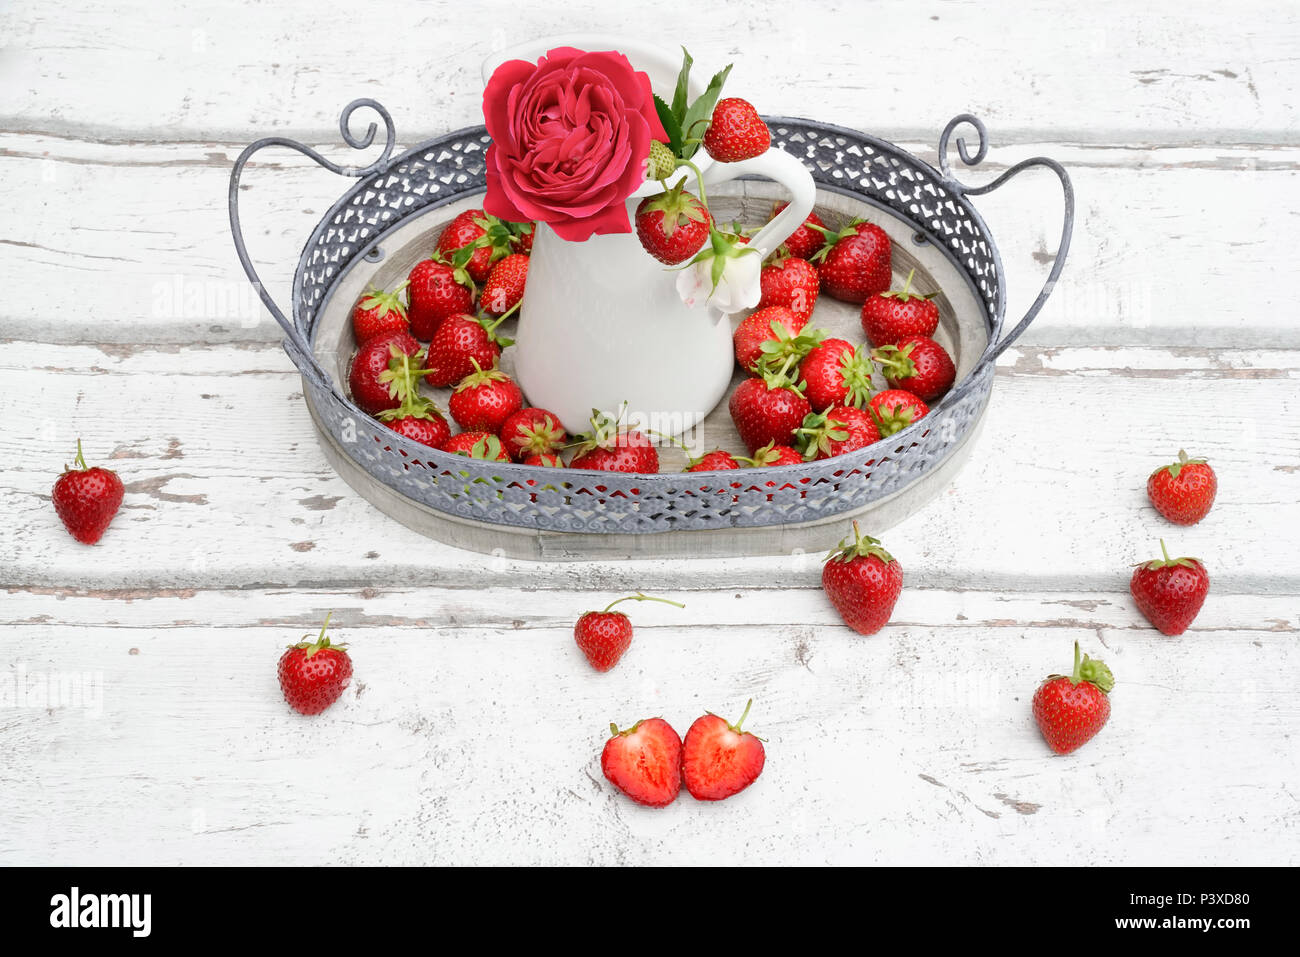 Fresh plump strawberries on white wooden background. A red rose in a white tin can on an old metal tray make a vintage look. Stock Photo